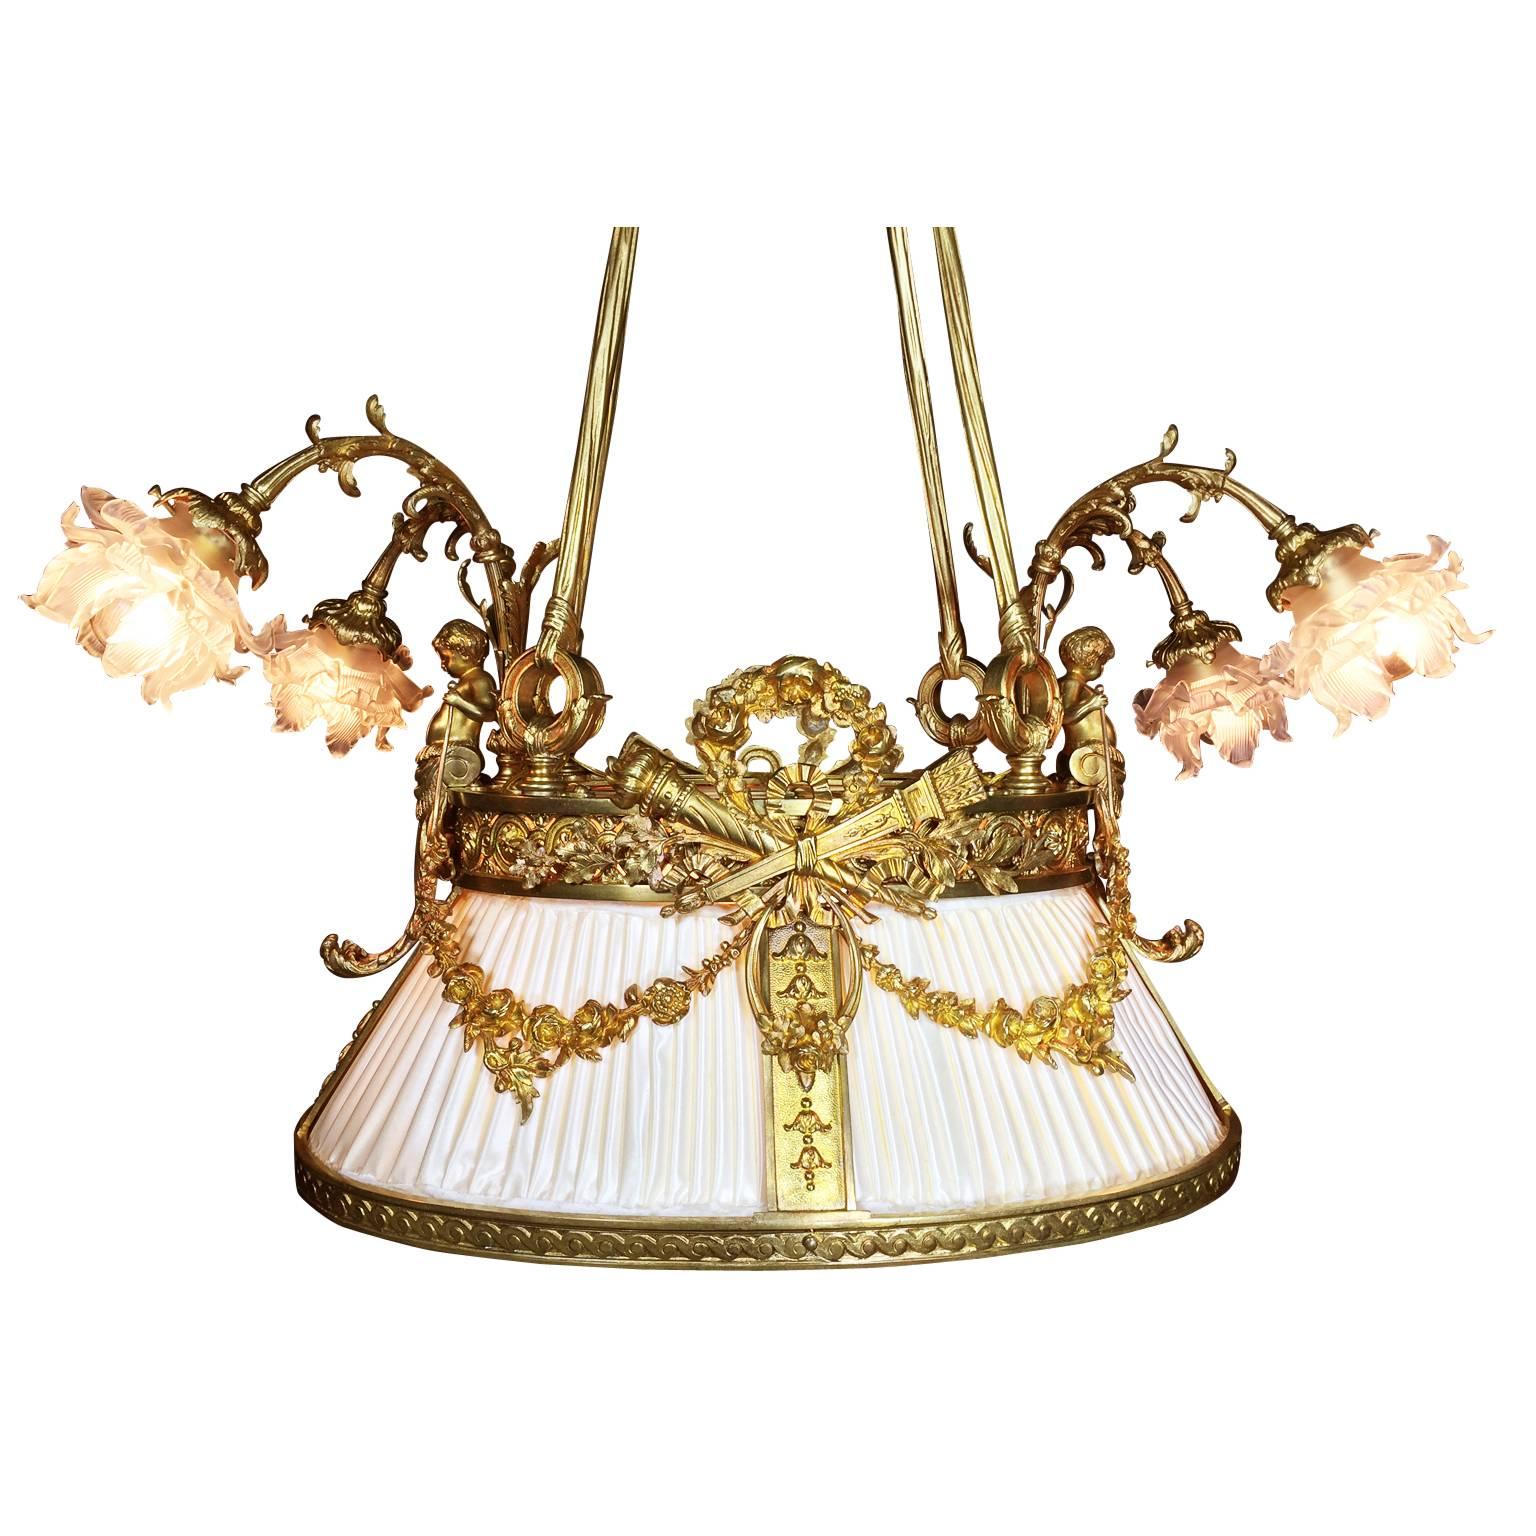 A fine and rare French 19th-20th century Belle Époque gilt bronze figural nine-light chandelier. The ovoid shaped frame, in the form of a hanging shade, surmounted with a gilt bronze Putto at each end, both holding floral wreaths below a two-light